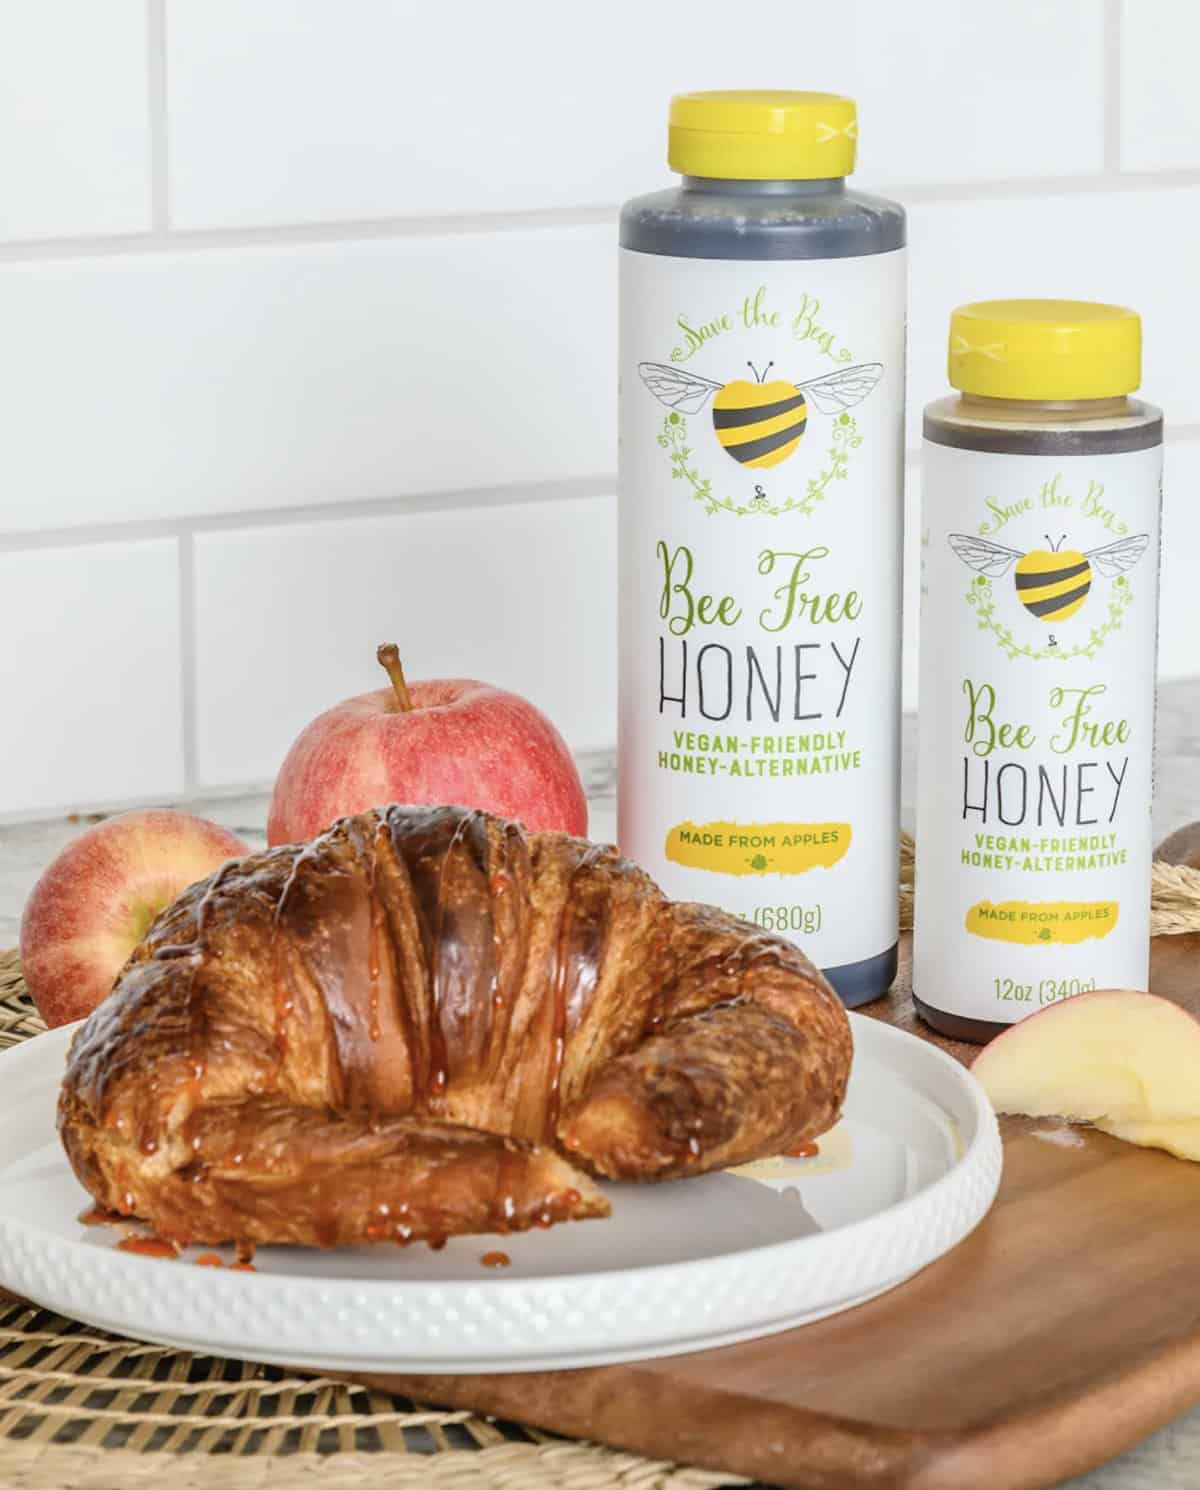 Store-bought bottles of organic vegan bee-free honey made from apples next to a croissant.